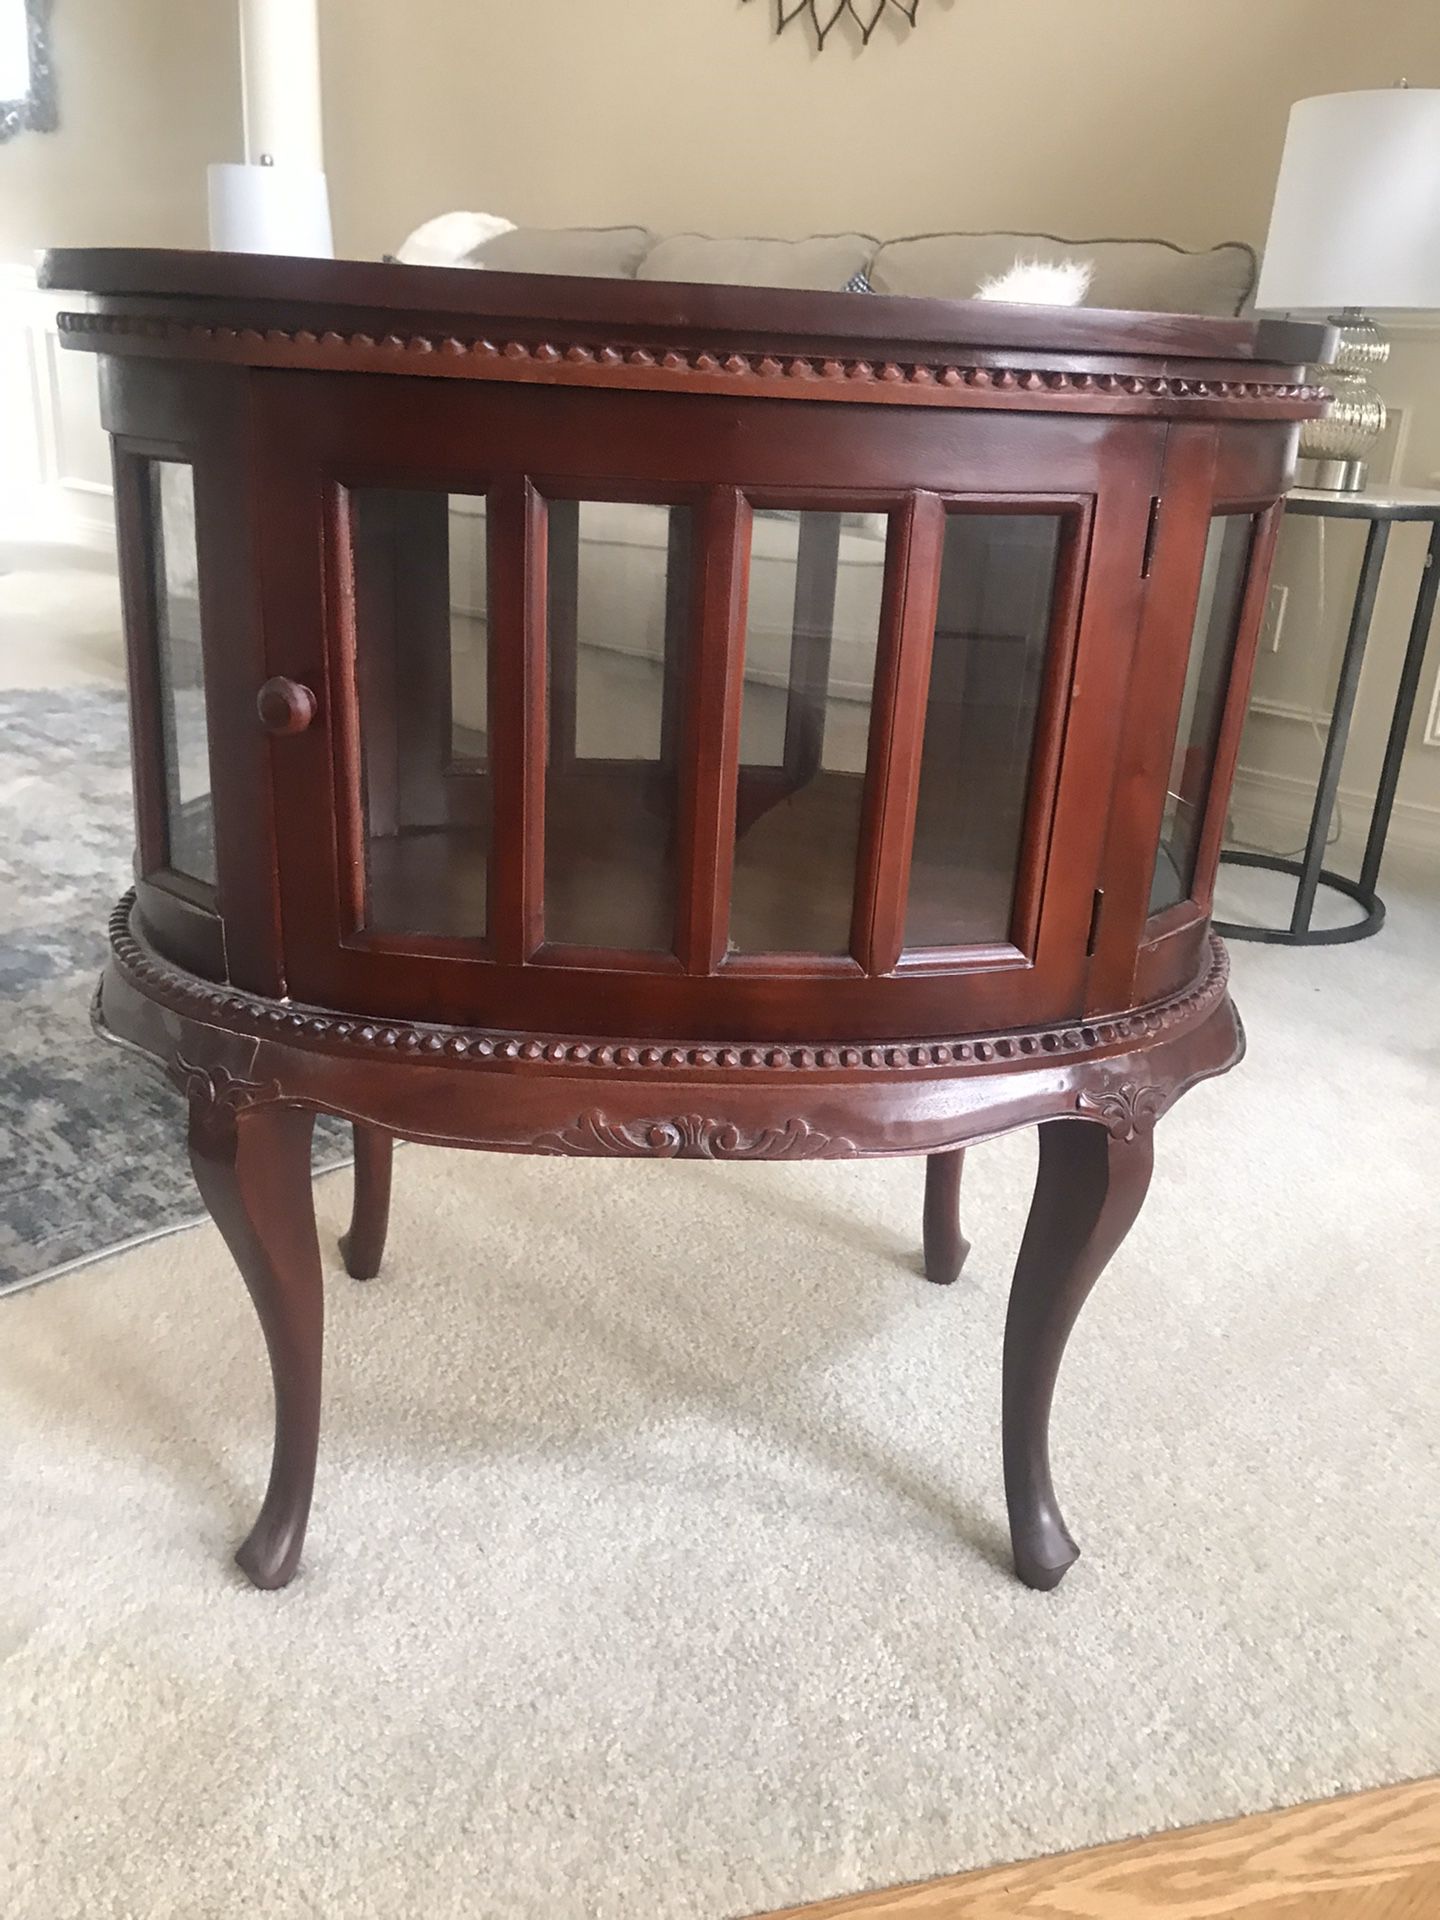 End tables $35 for each